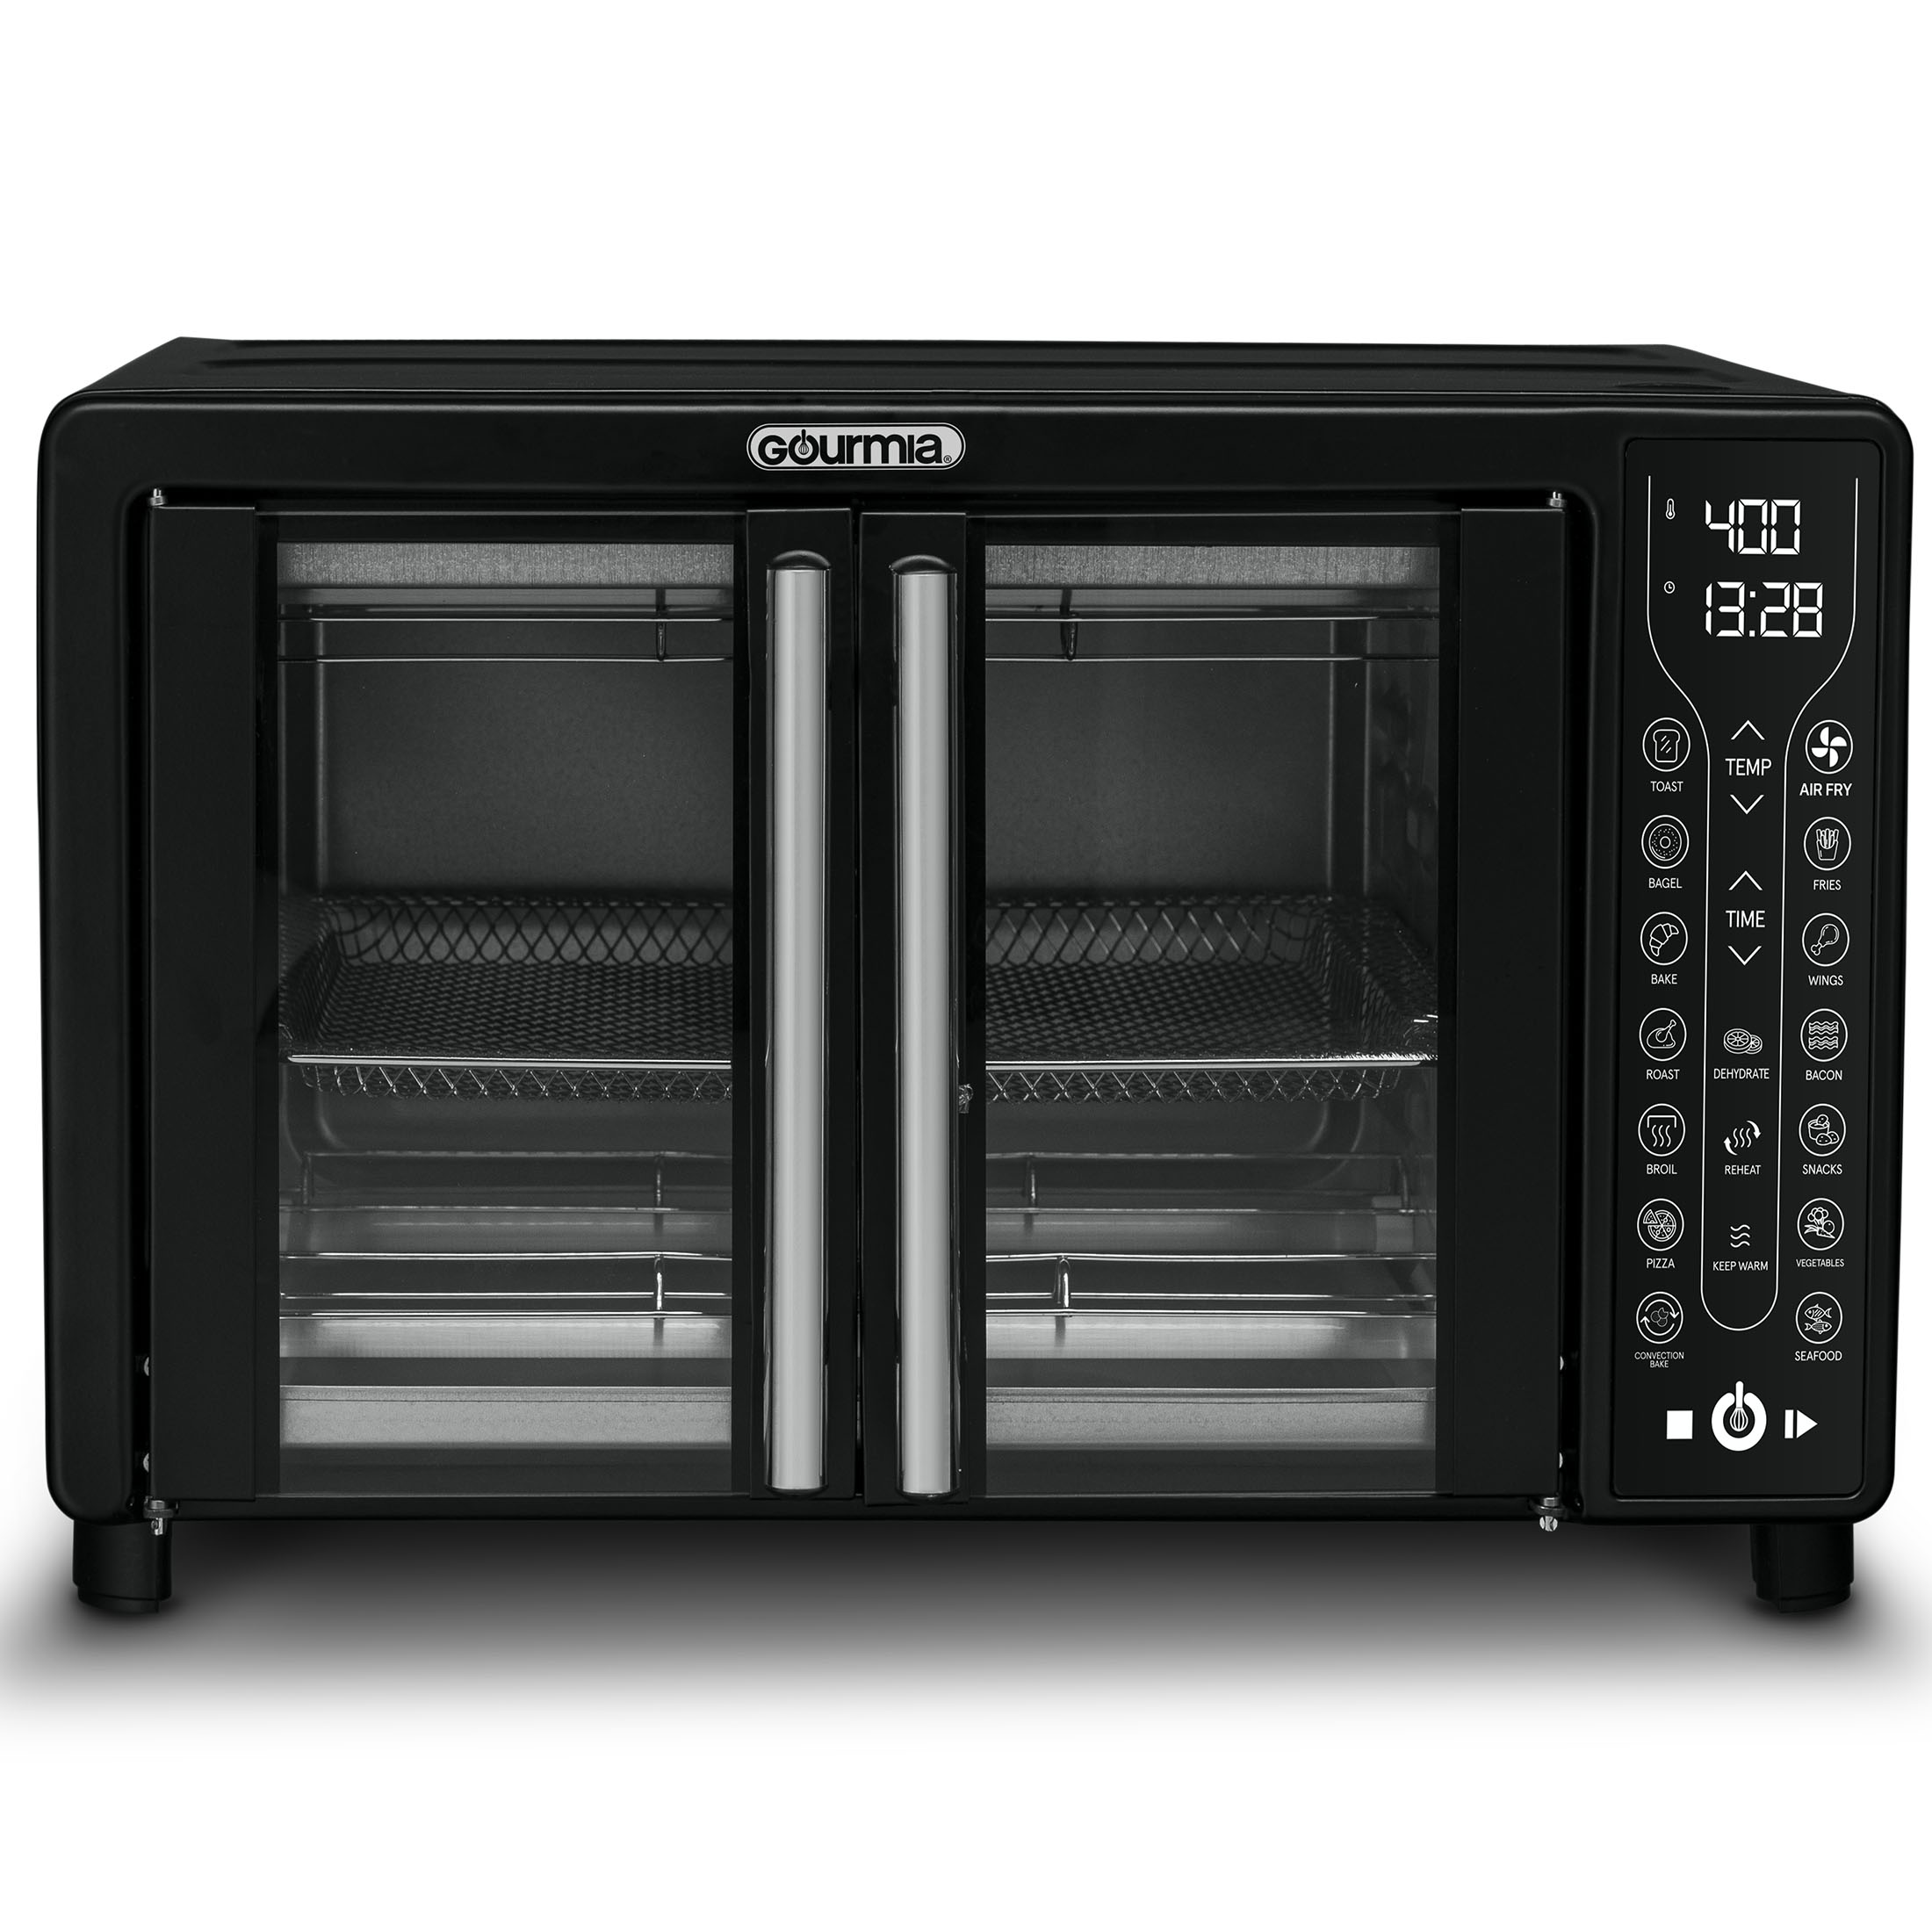 Gourmia Digital French Door Air Fryer Toaster Oven, Black - image 1 of 7